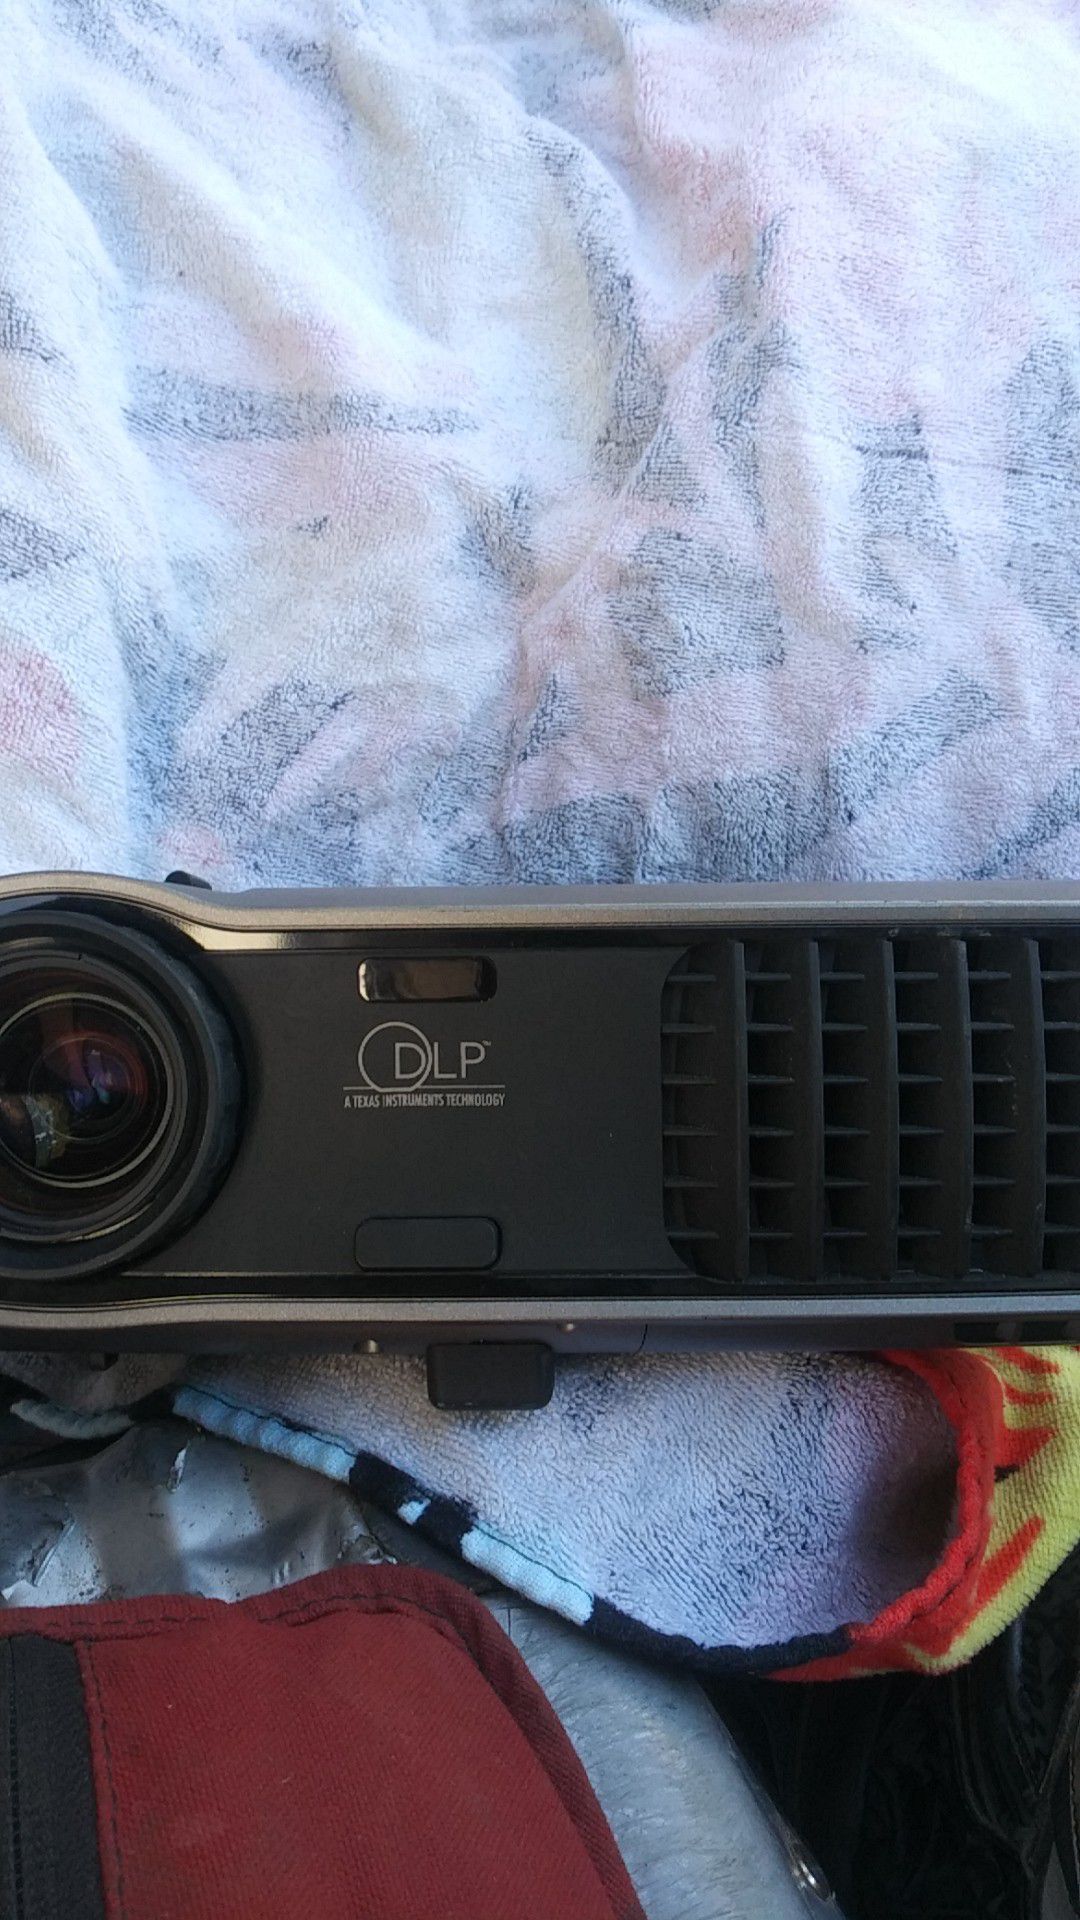 Dell projector